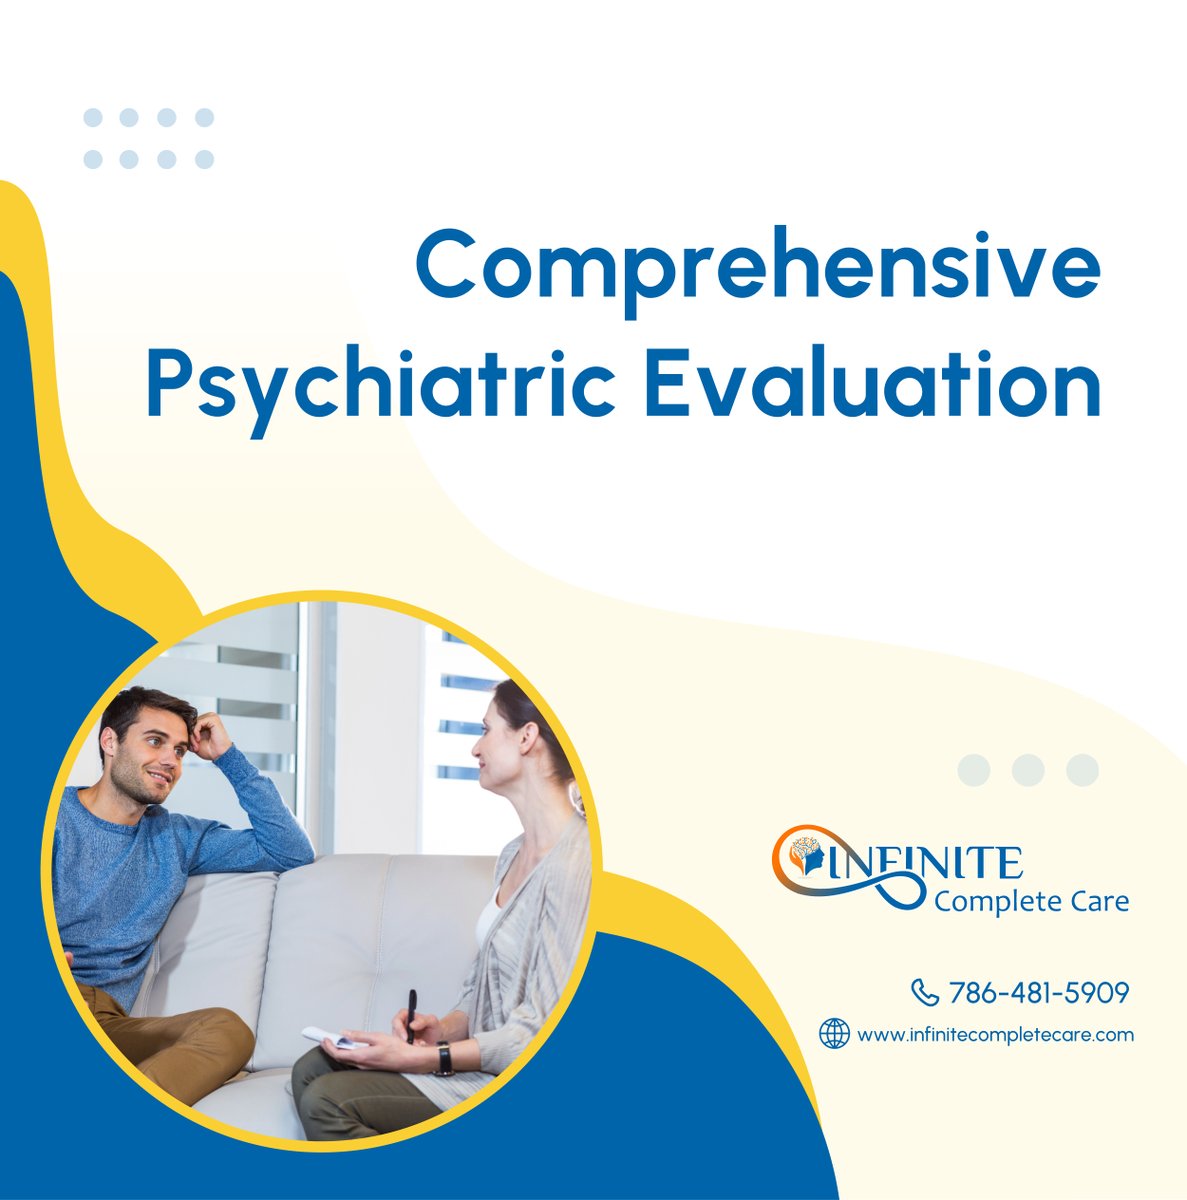 Infinite Complete Care's psychiatric evaluation involves thorough assessment and collaboration to tailor your treatment plan. Take the courageous step—book with us here: tinyurl.com/3k2fn79s. 

#HomesteadFL #BehavioralHealthCare #PsychiatricEvaluation #MentalHealthAssessment